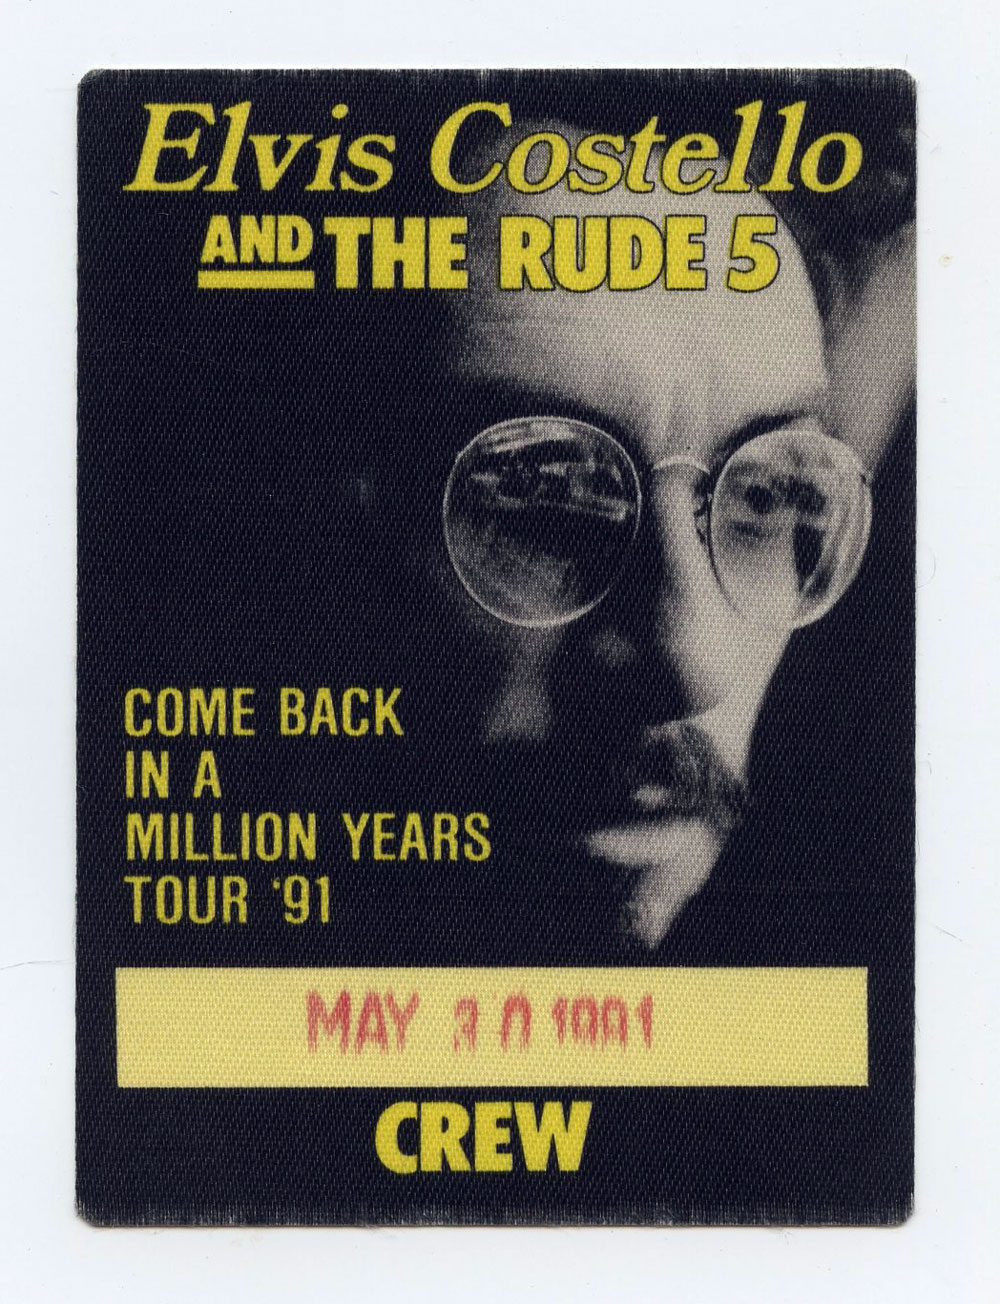 Elvis Costello Backstage Pass Come Back in a Million Years Tour 91